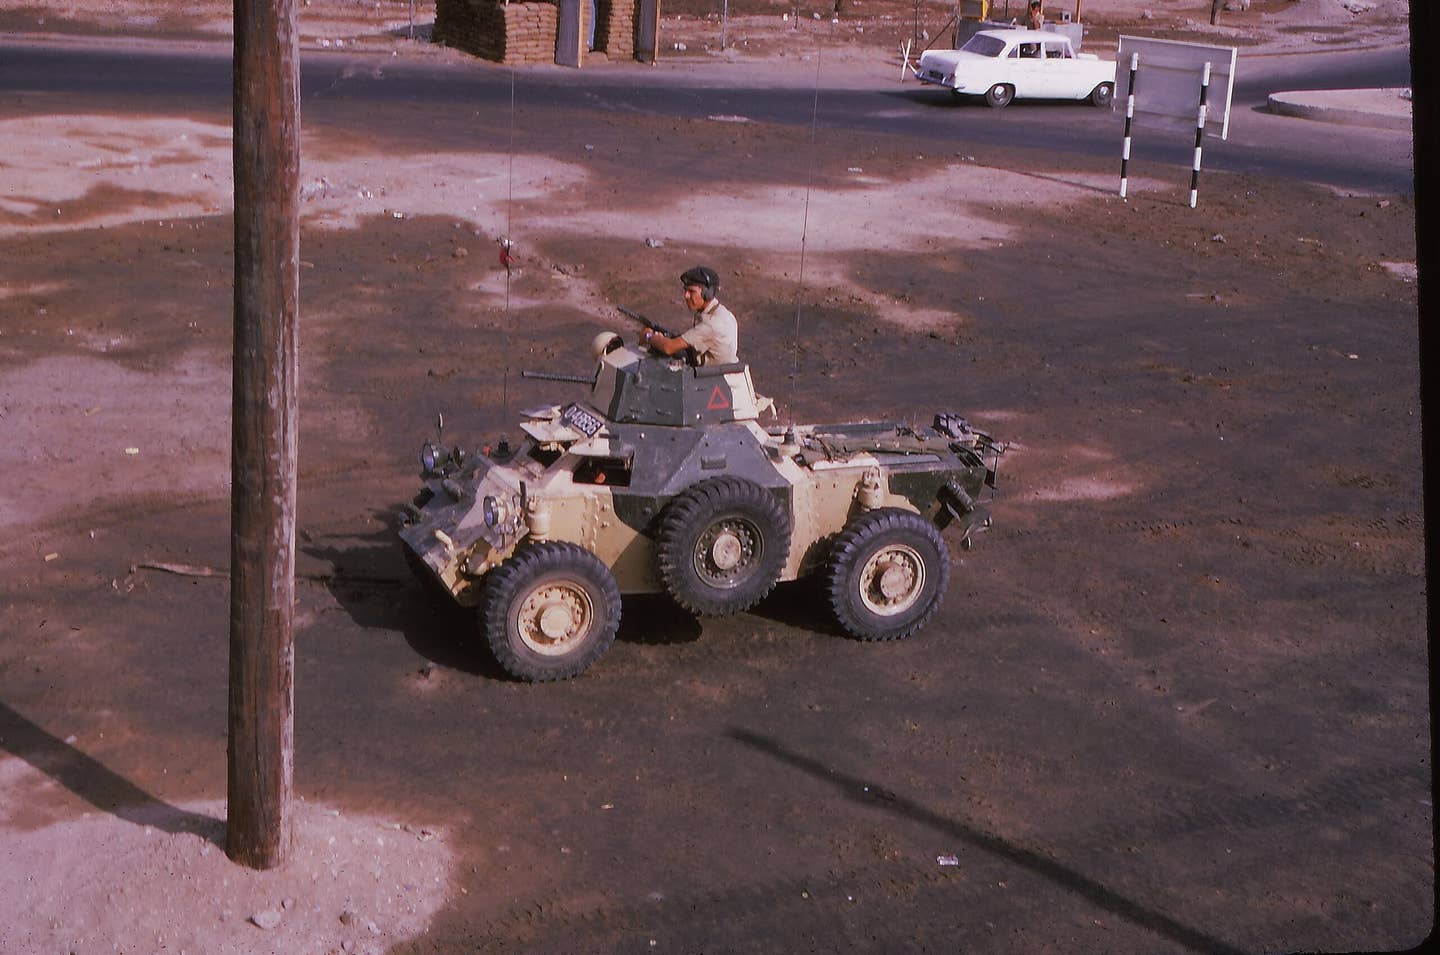 A Ferret scout car of the Queens Dragoon Guards returns from escorting military vehicles in the Aden Governorate in 1967, while it was still under British rule. <em>Brian Harrington Spier/Wikimedia Commons</em>